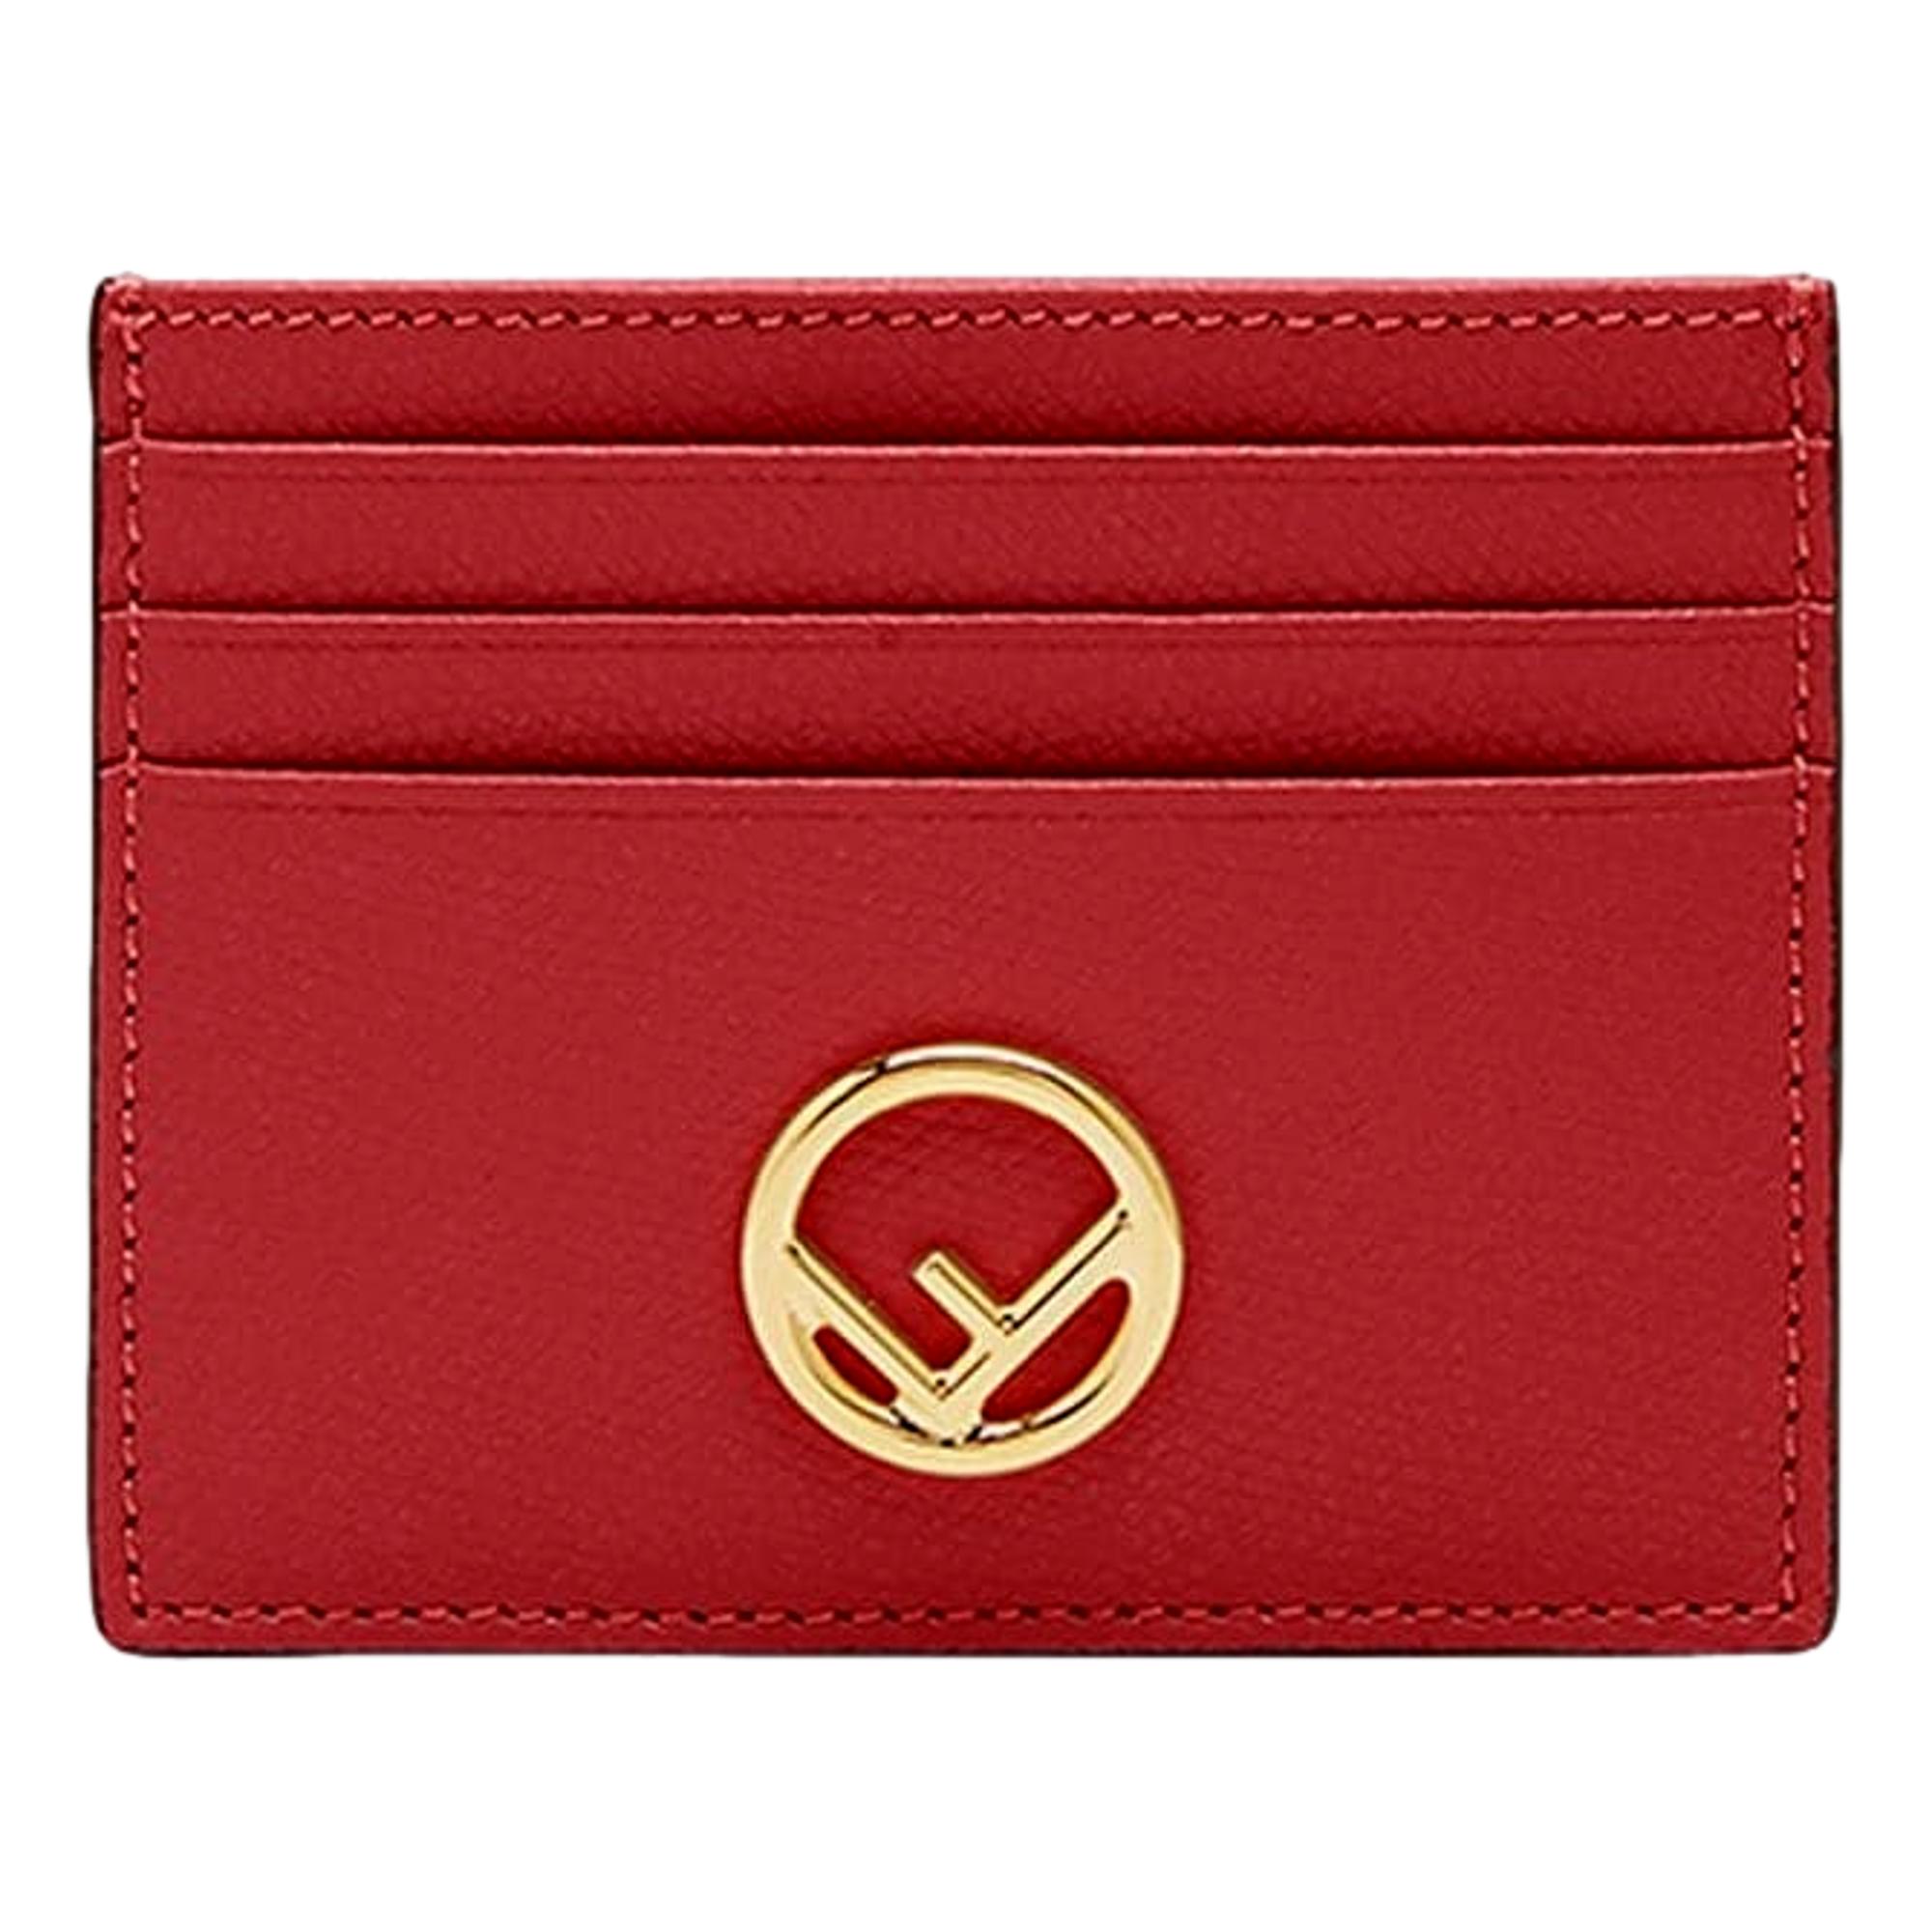 Fendi F Logo Barola Red Leather Card Case Wallet 8M0445 at_Queen_Bee_of_Beverly_Hills